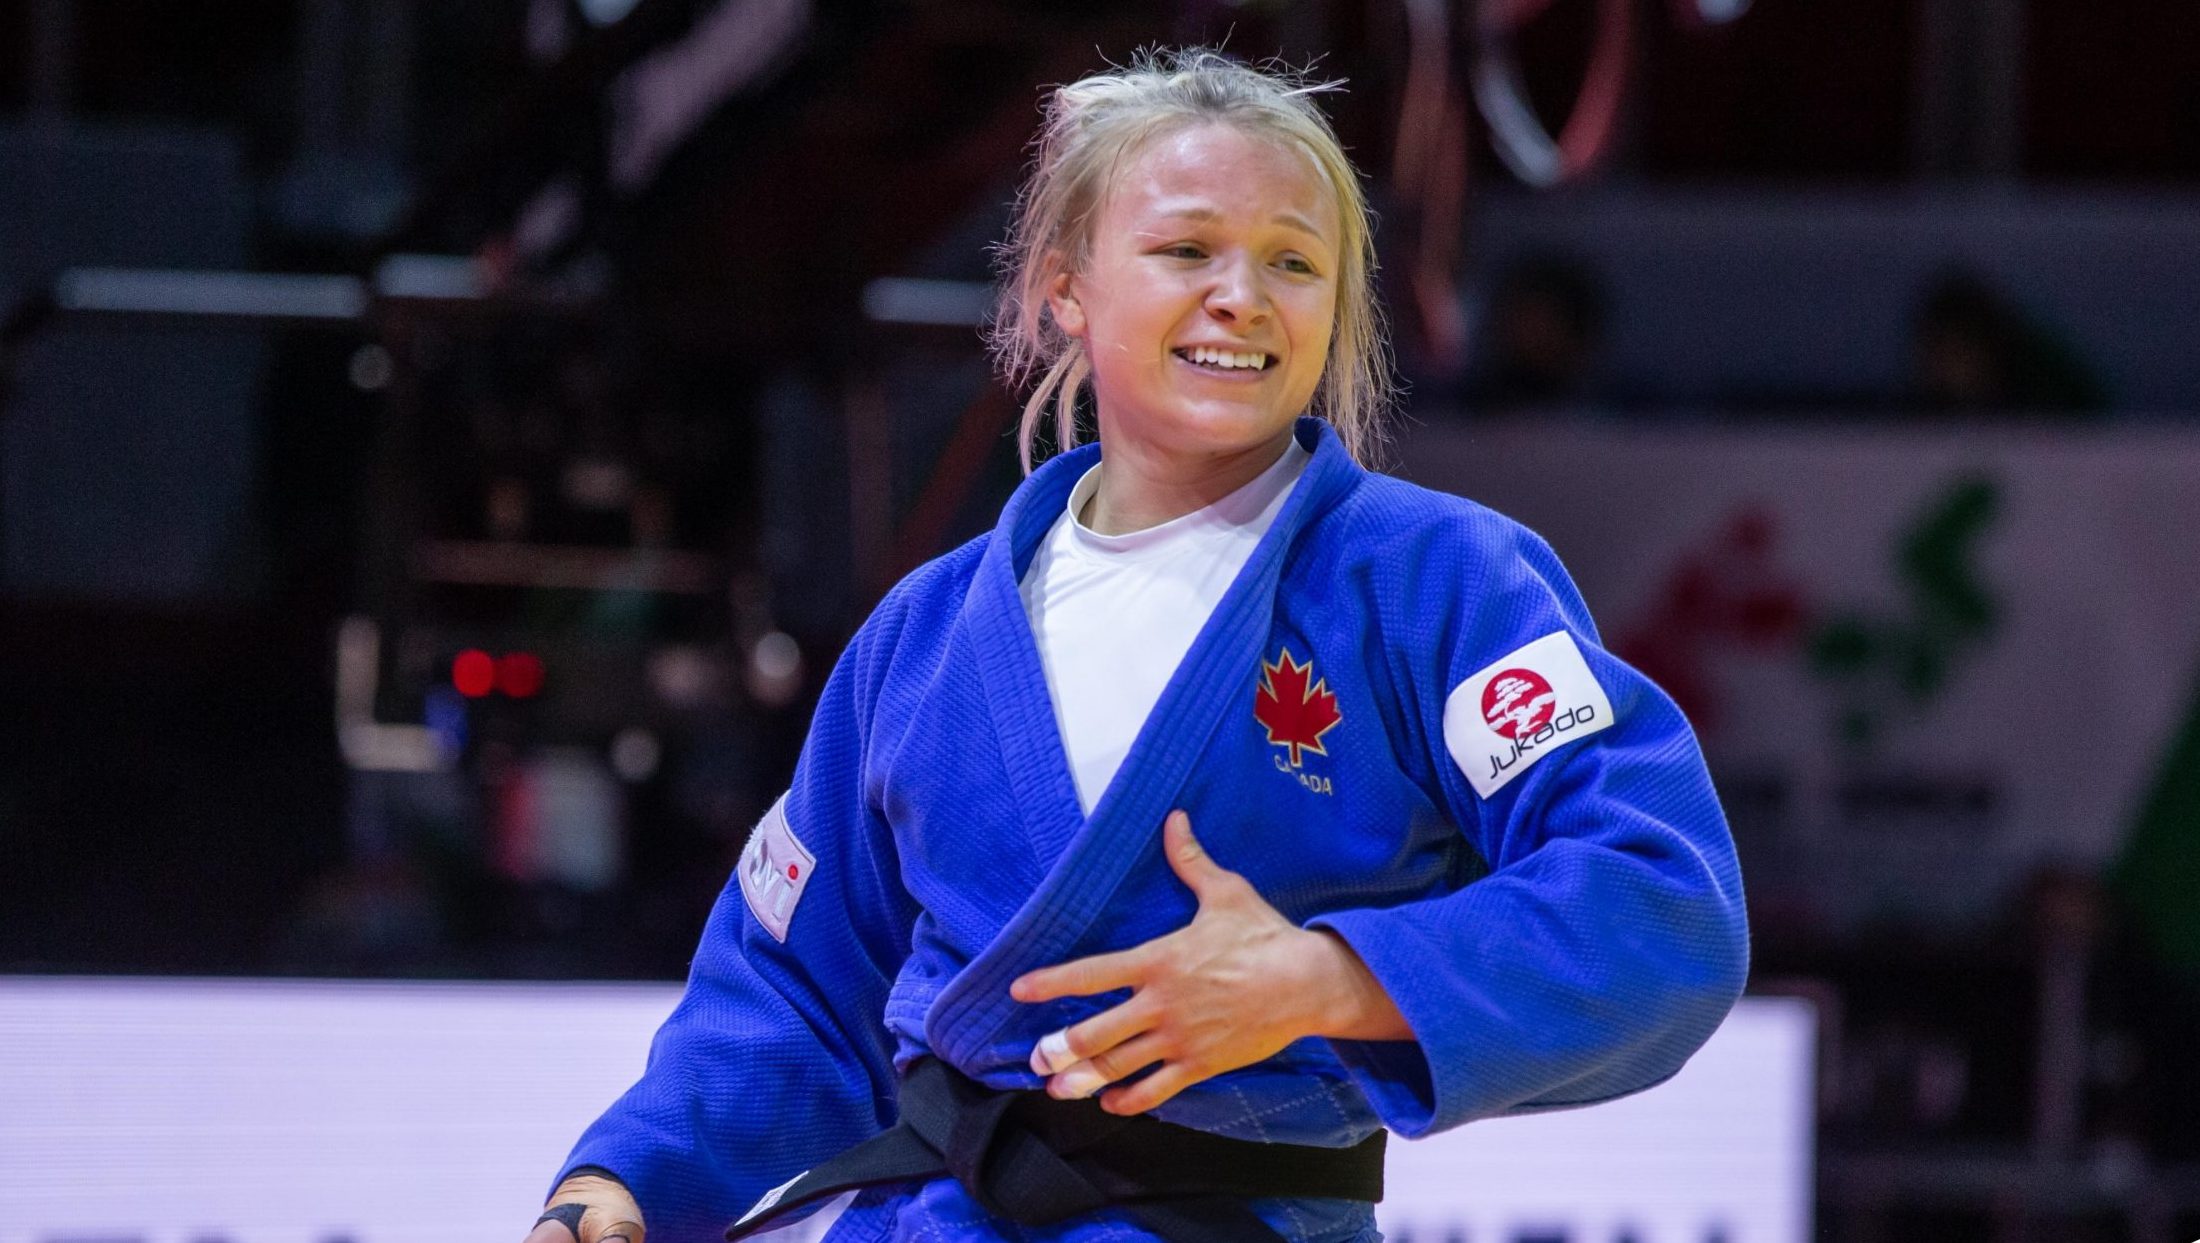 Klimkait wins gold and Olympic ticket at World Judo Championships